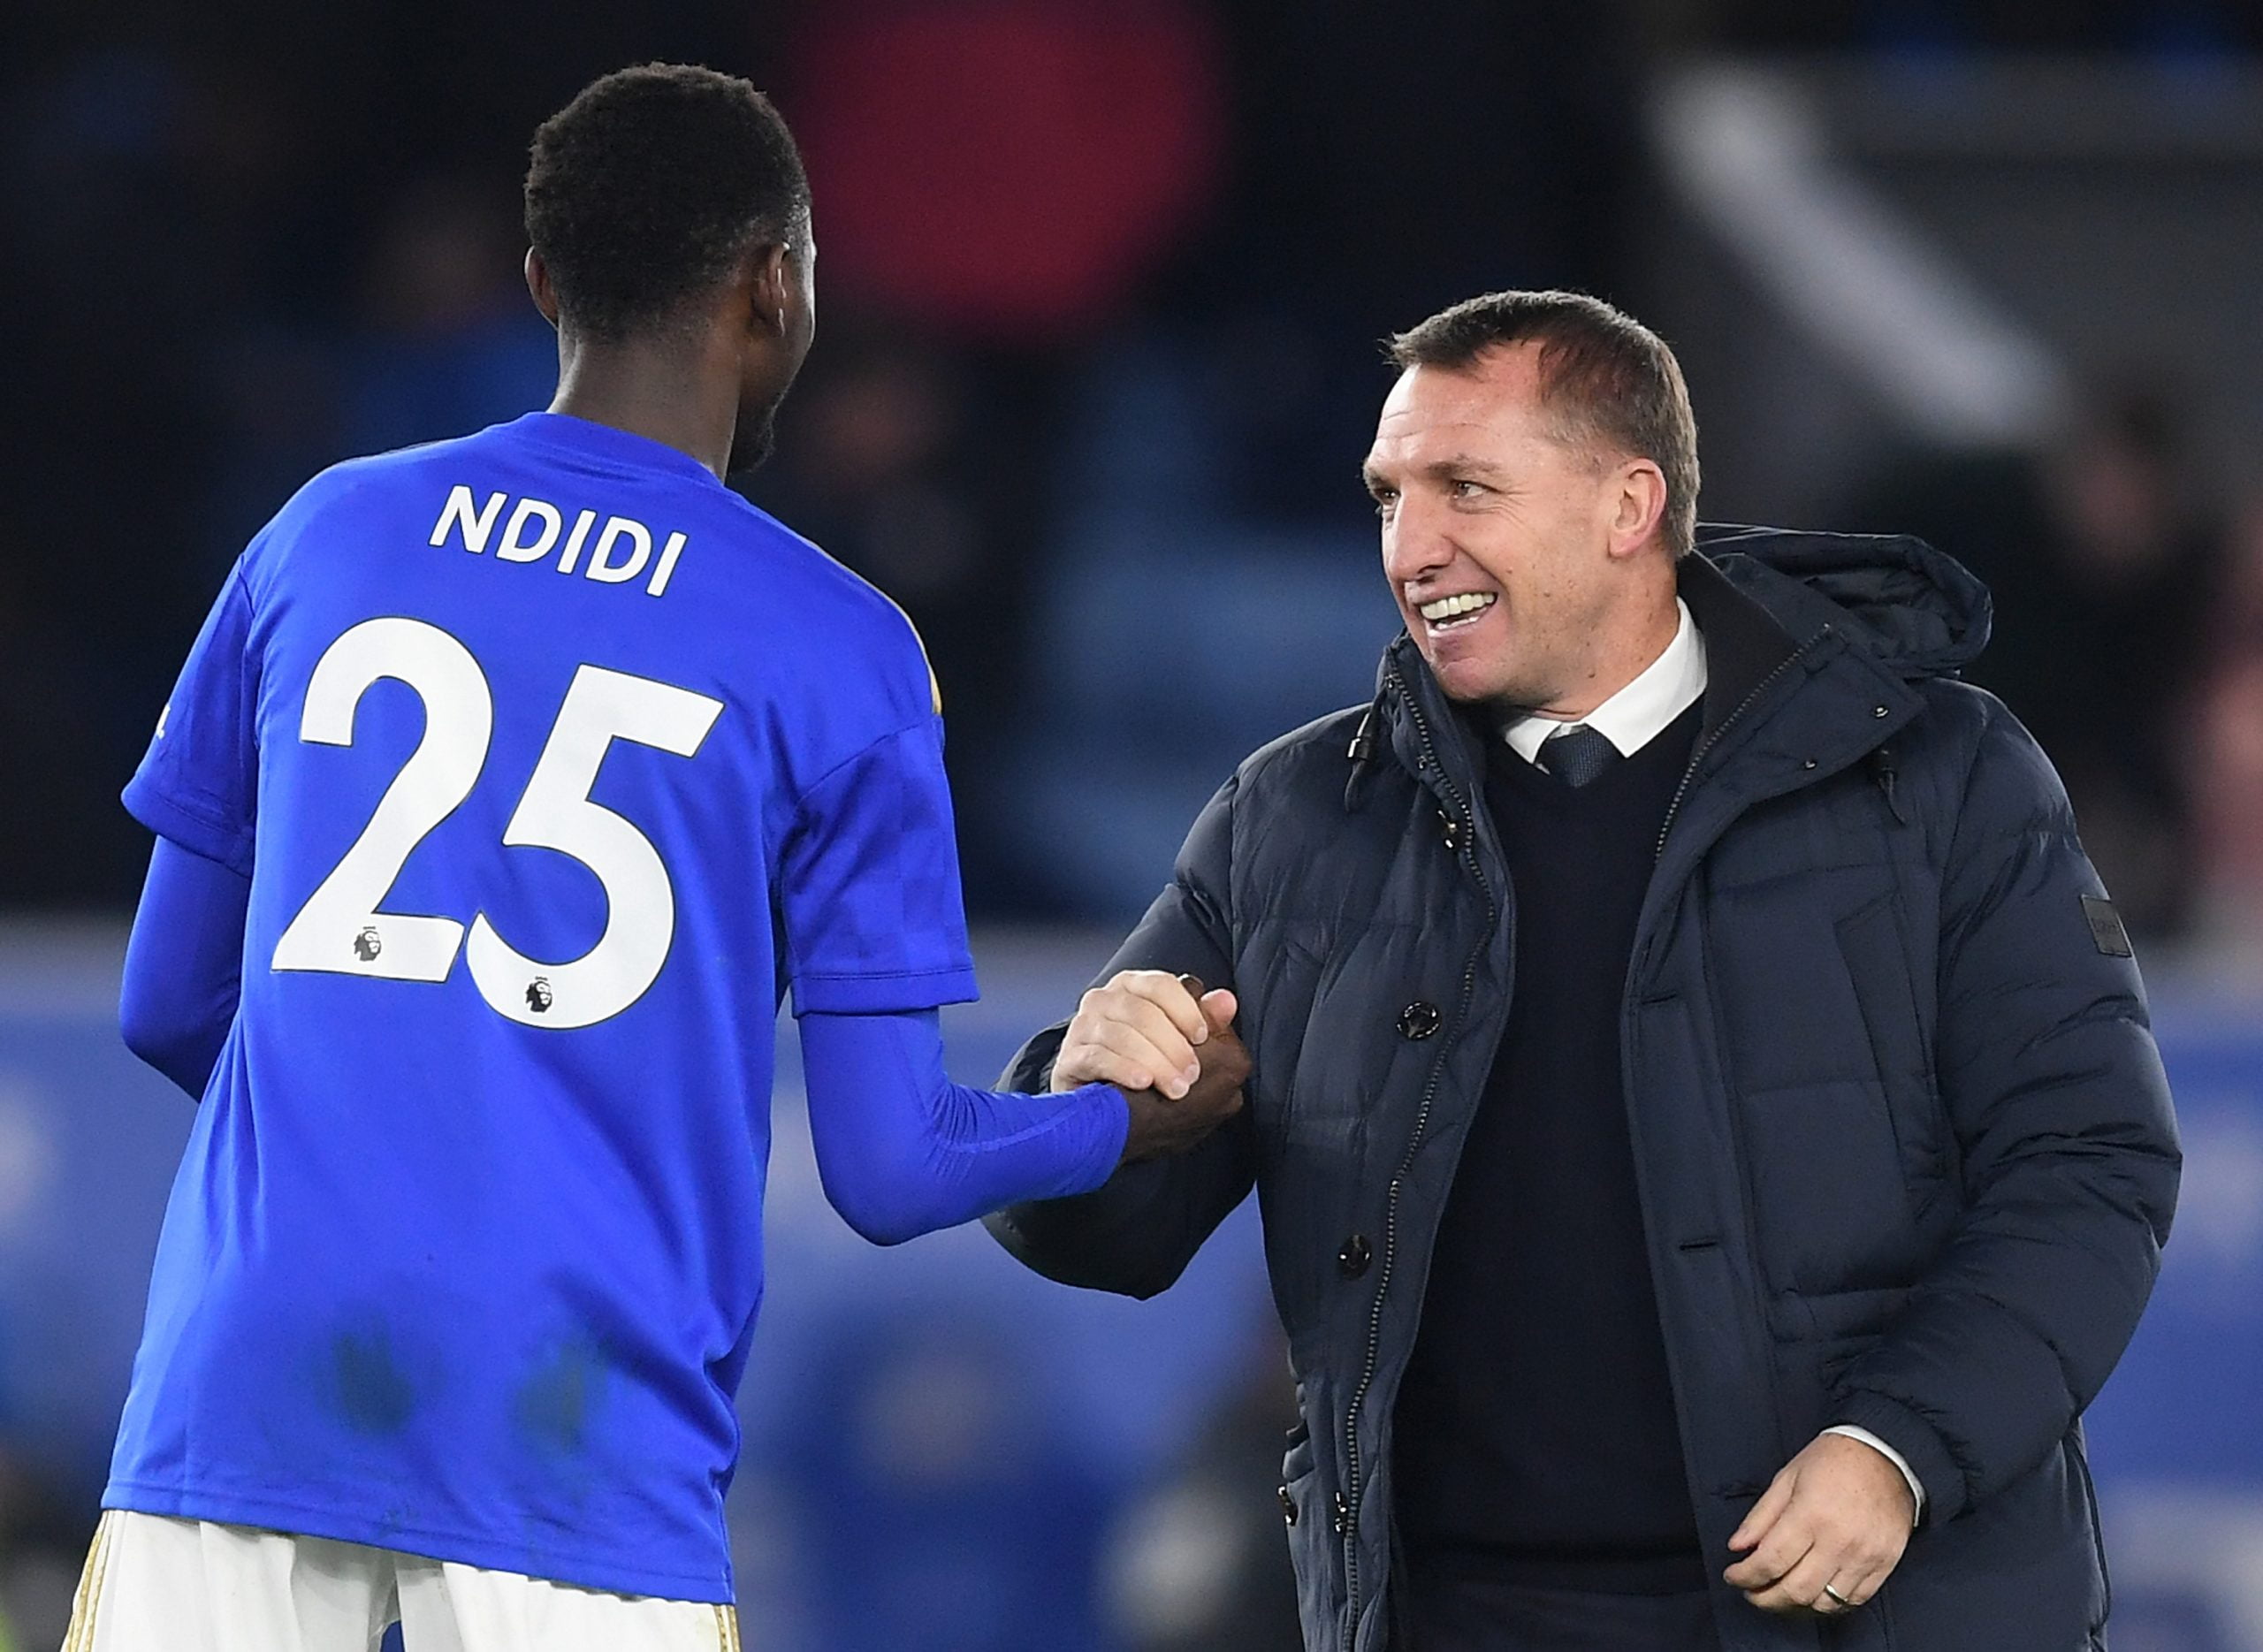 Celtic target Wilfred Ndidi shaking hands with Rodgers